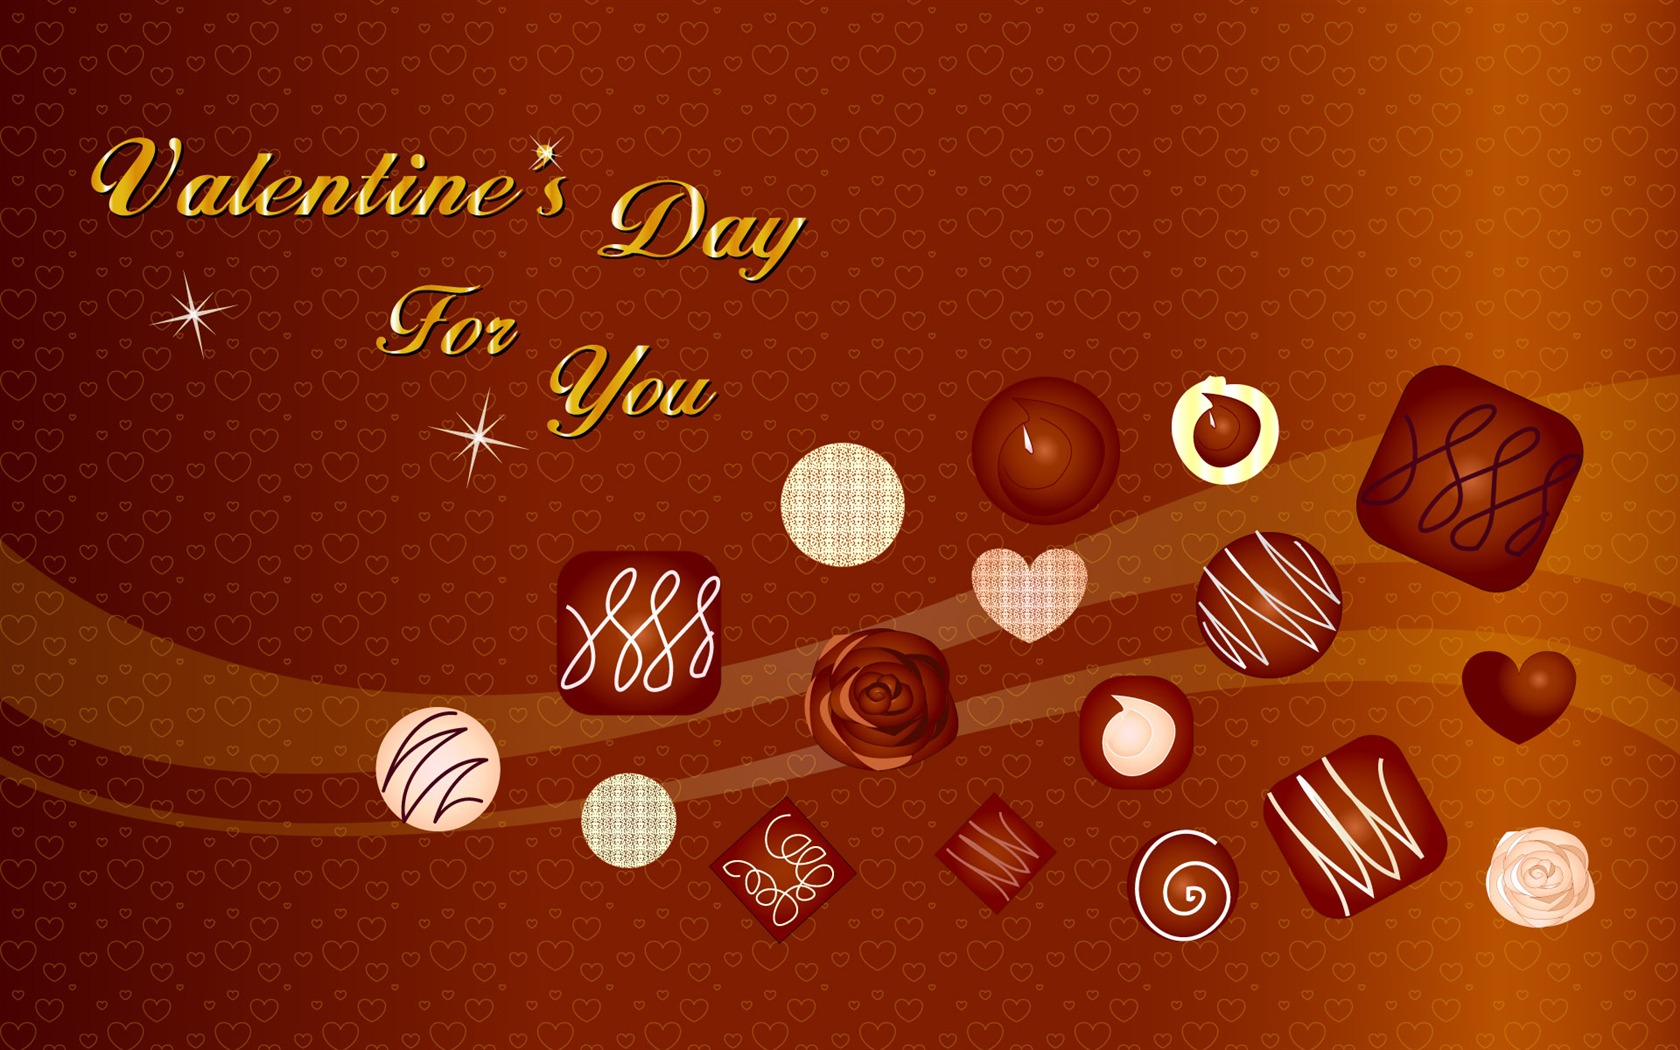 Valentine's Day Theme Wallpapers (1) #3 - 1680x1050